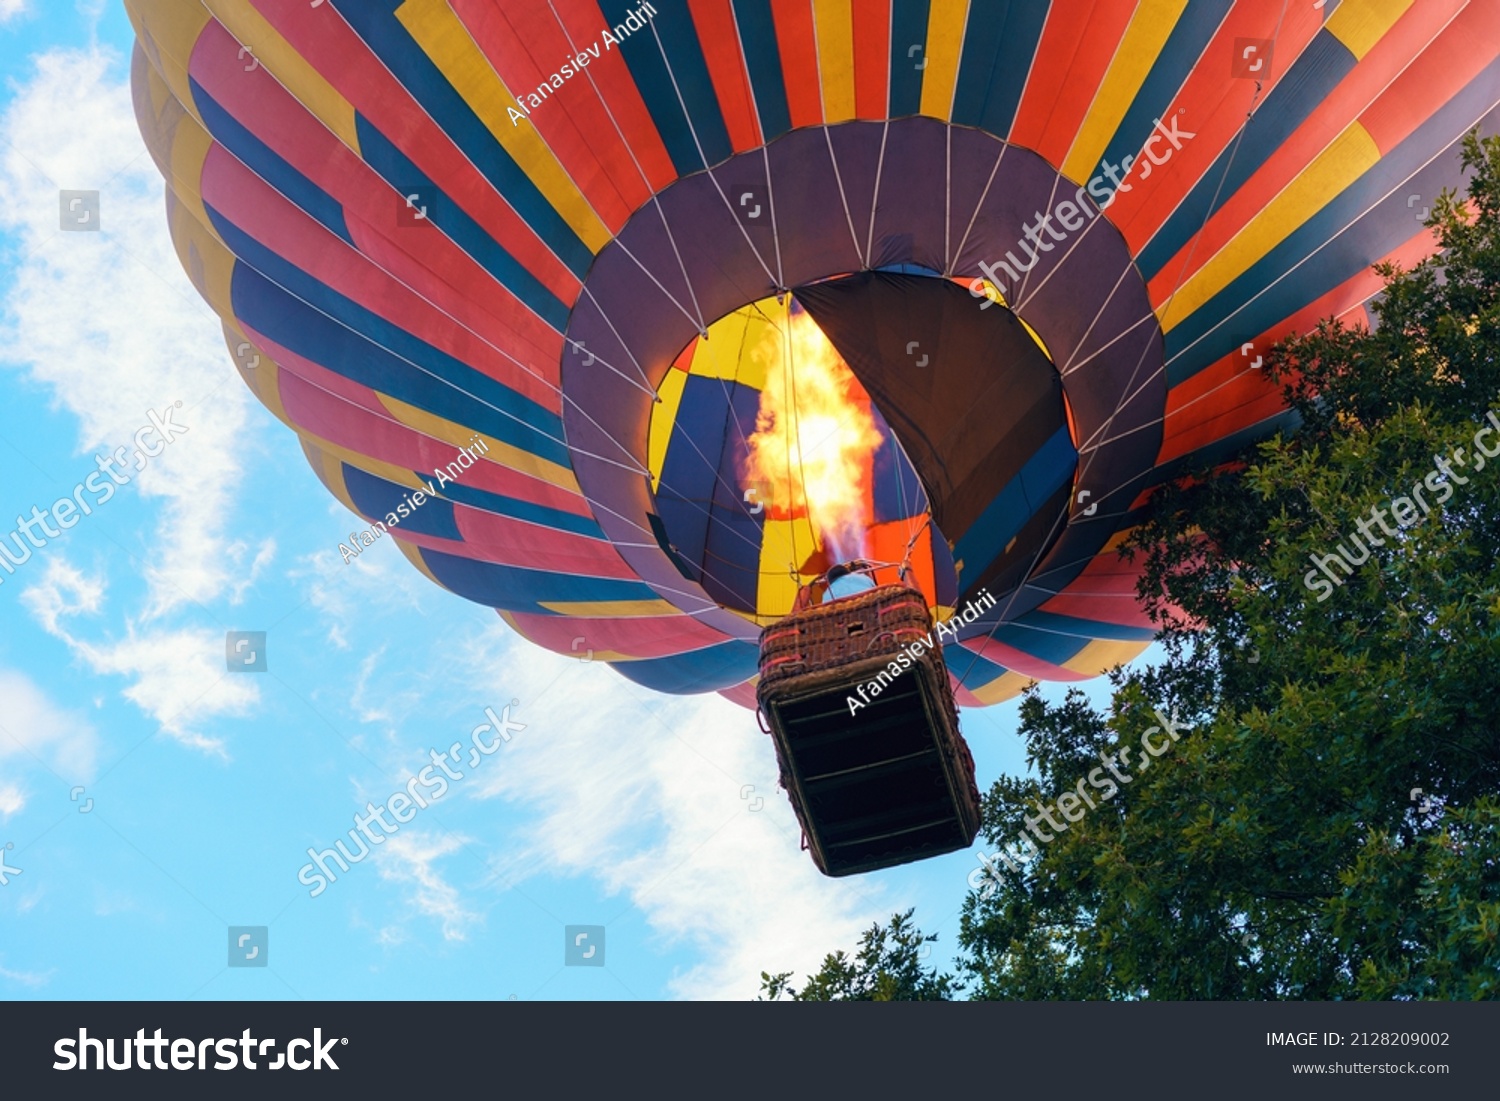 Colorful hot air balloon with people in a basket rises to the sky among the trees. #2128209002